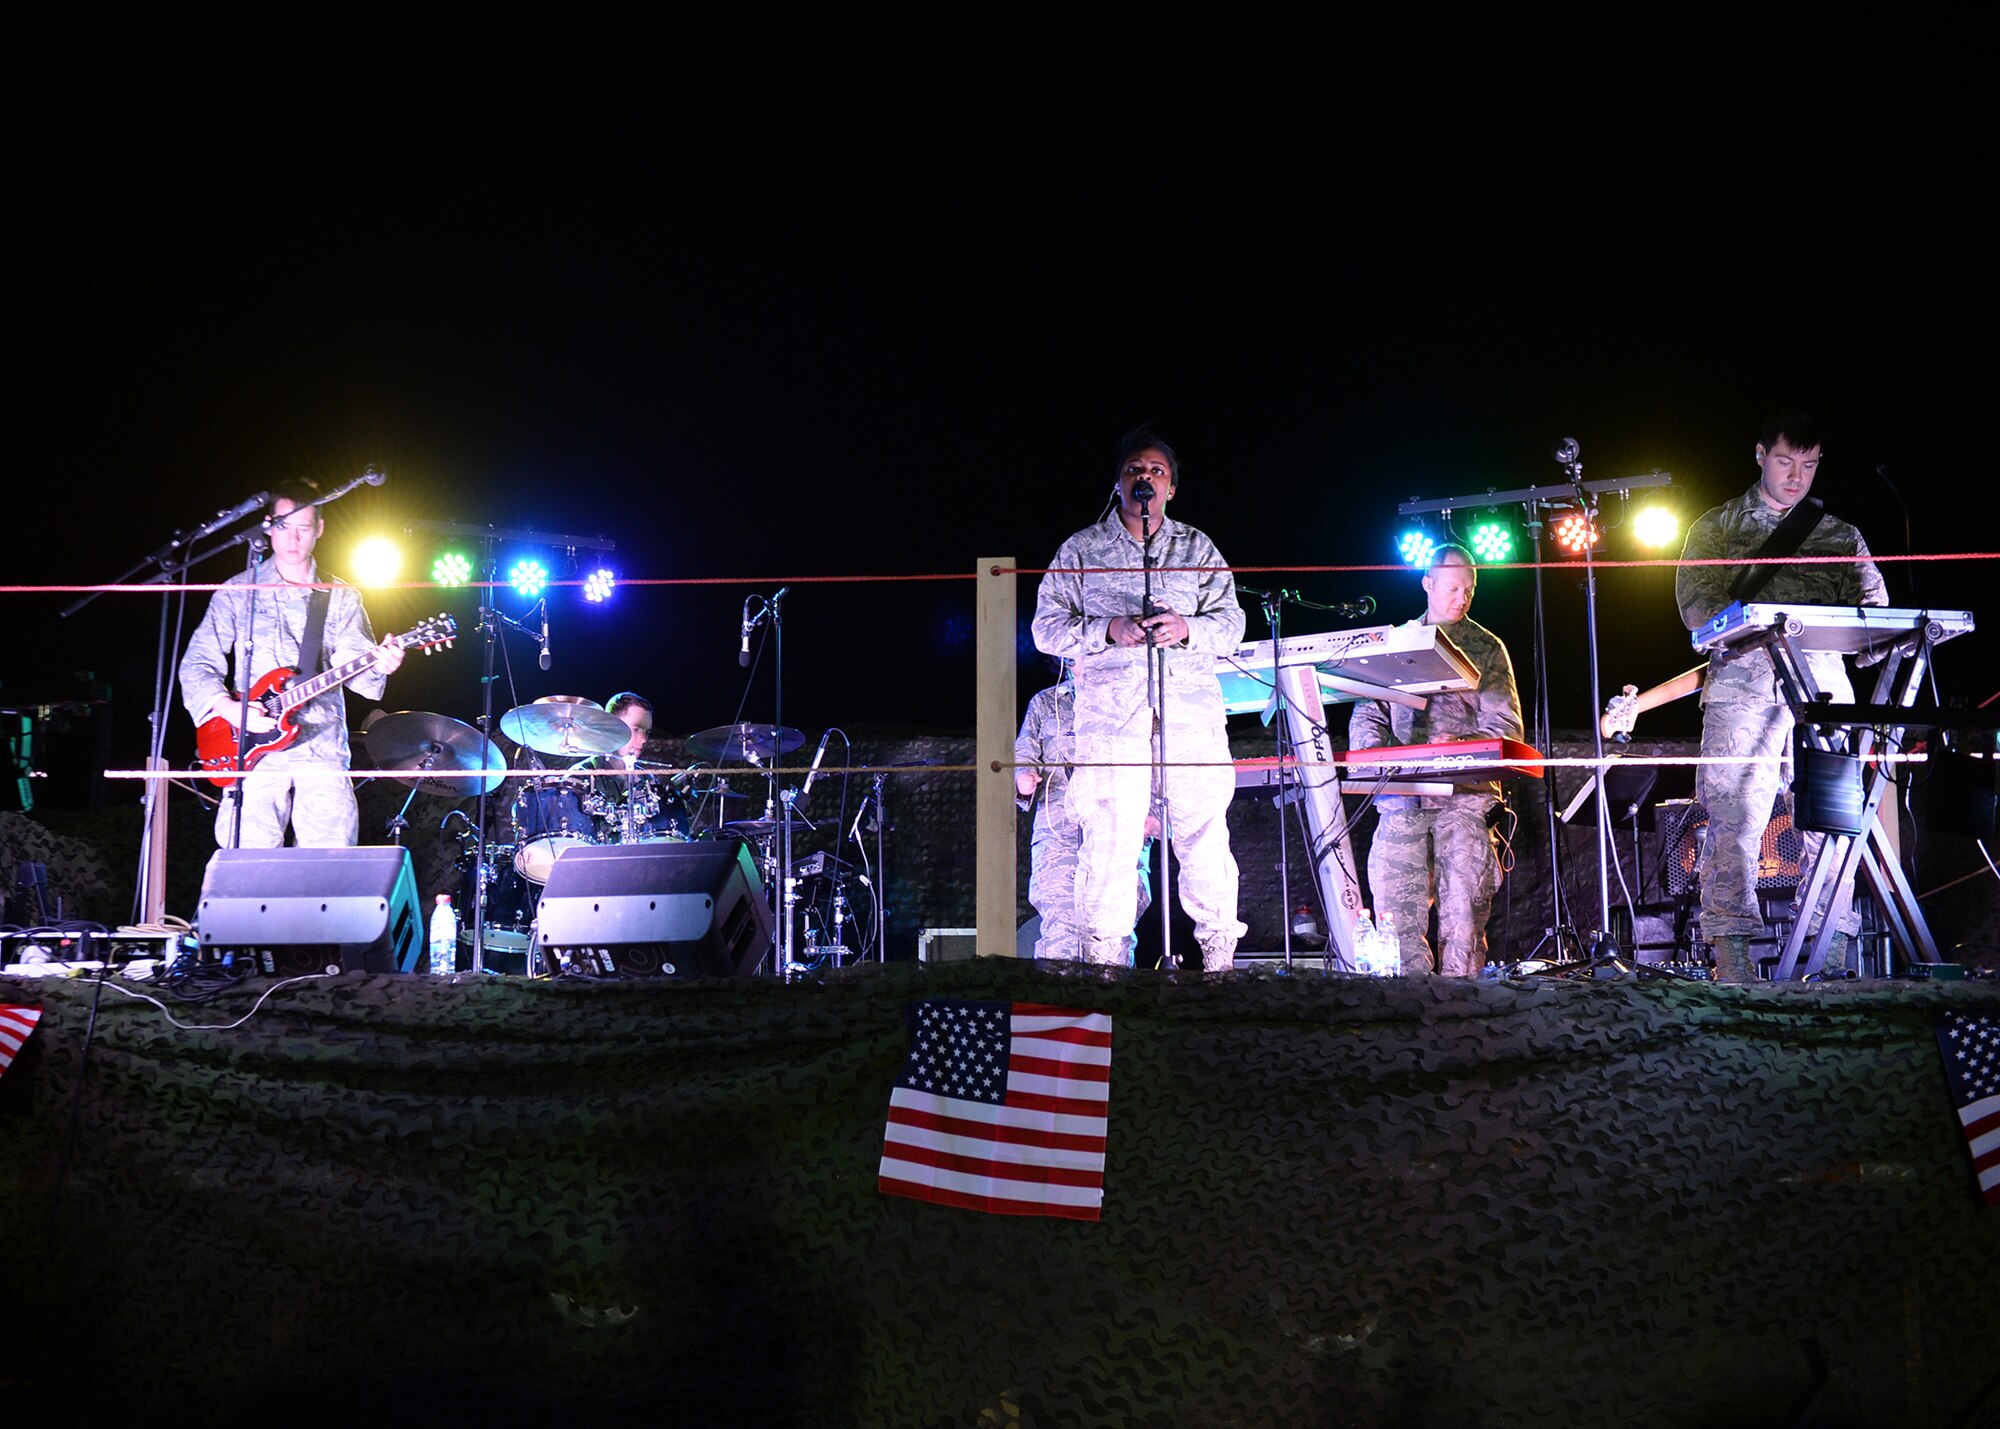 Members of Touch ‘n Go, an ensemble of the United States Air Forces in Europe Band, perform for Airmen and members of the Forces Armées Nigeriennes at Nigerien Air Base 201, Agadez, Niger, March 10, 2017. Touch ‘n Go performed for Airmen deployed to Niger as well as their counterparts. (U.S. Air Force photo by Senior Airman Jimmie D. Pike)